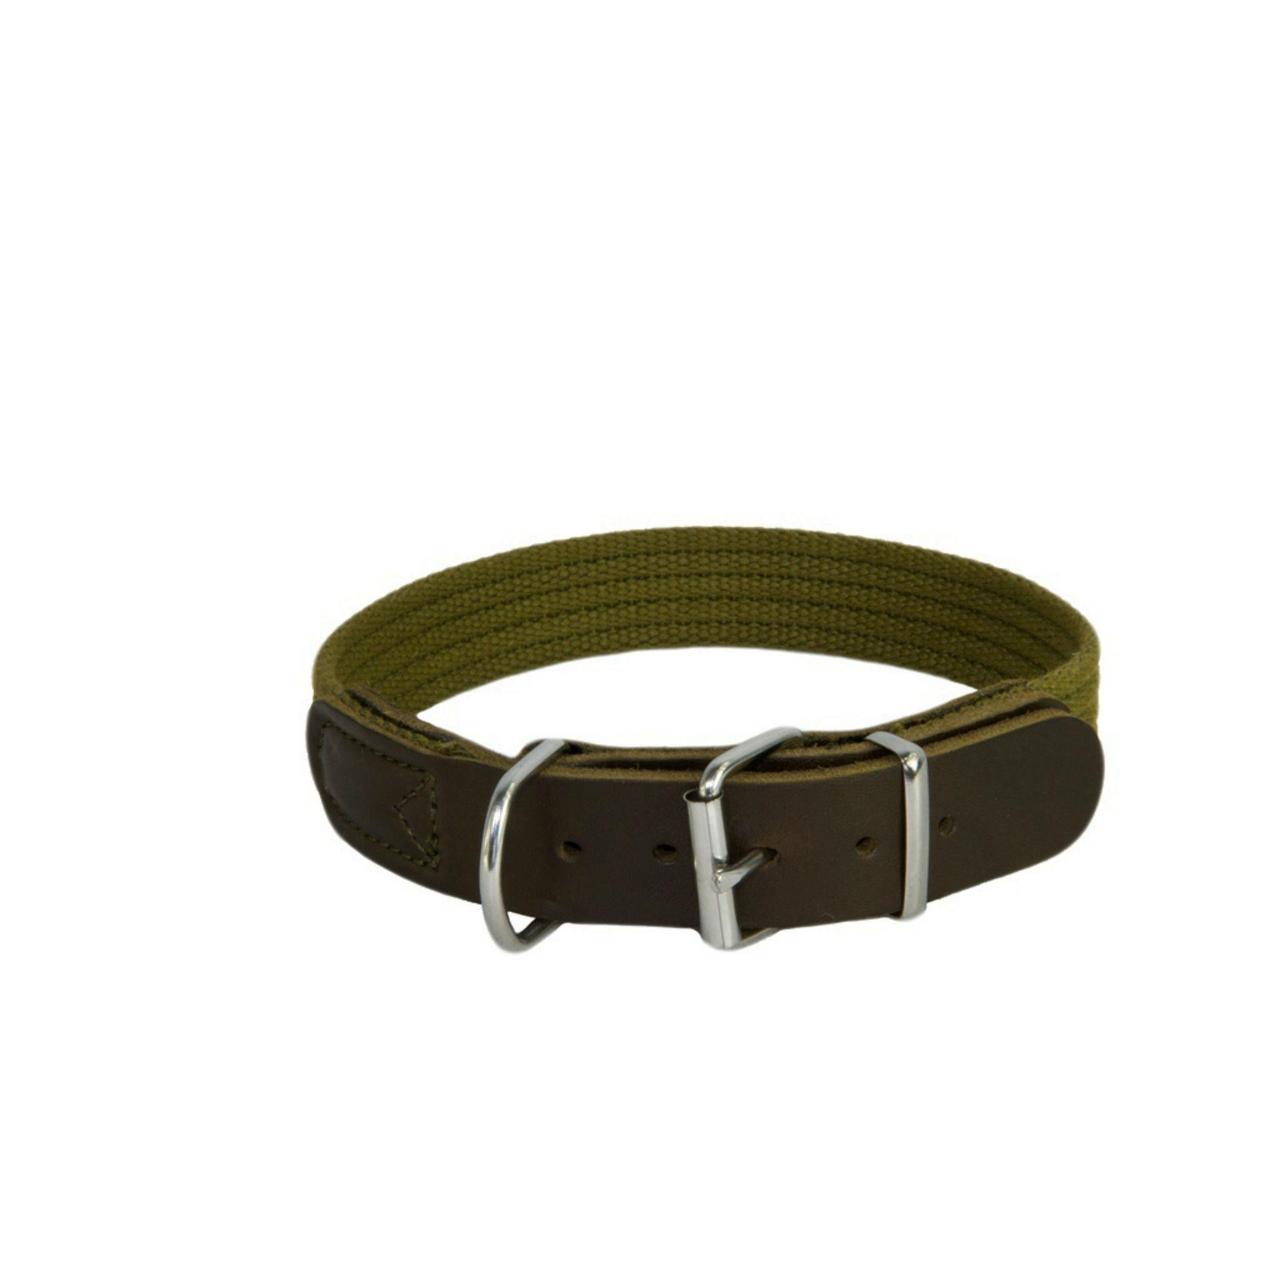 An image of Earthbound Cotton Green Collar 41 - 47cm